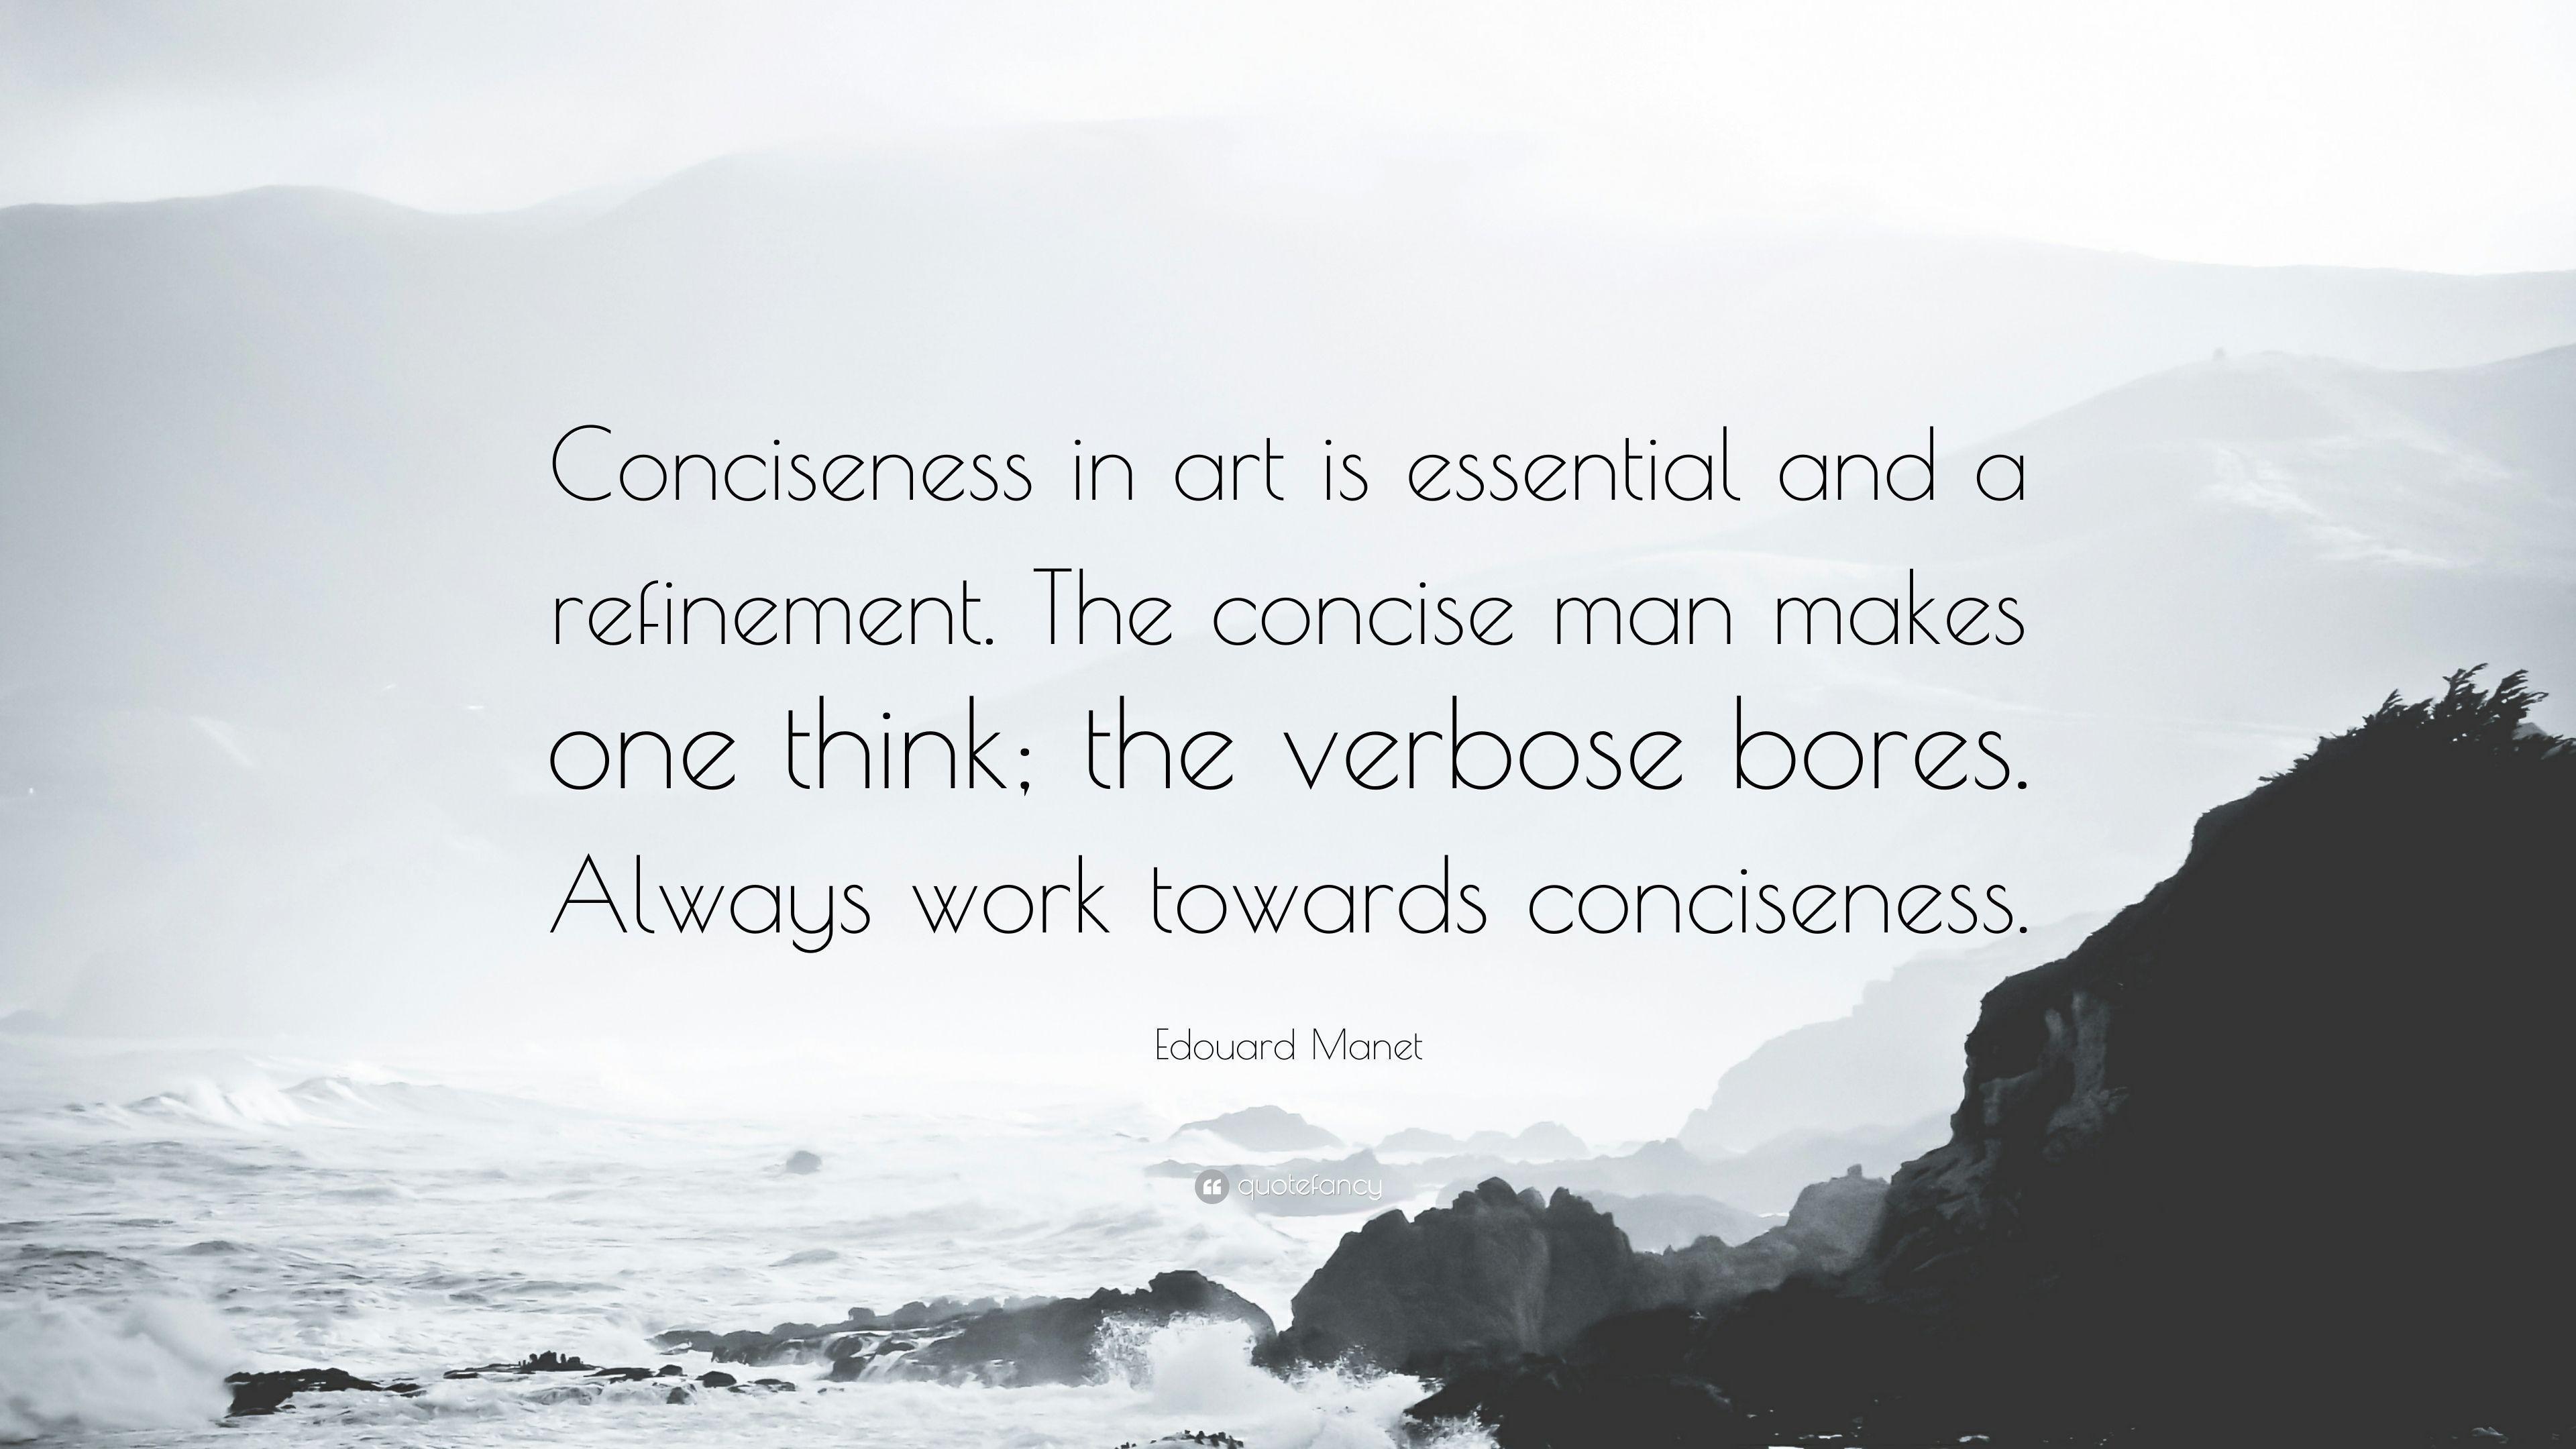 Edouard Manet Quote: “Conciseness in art is essential and a